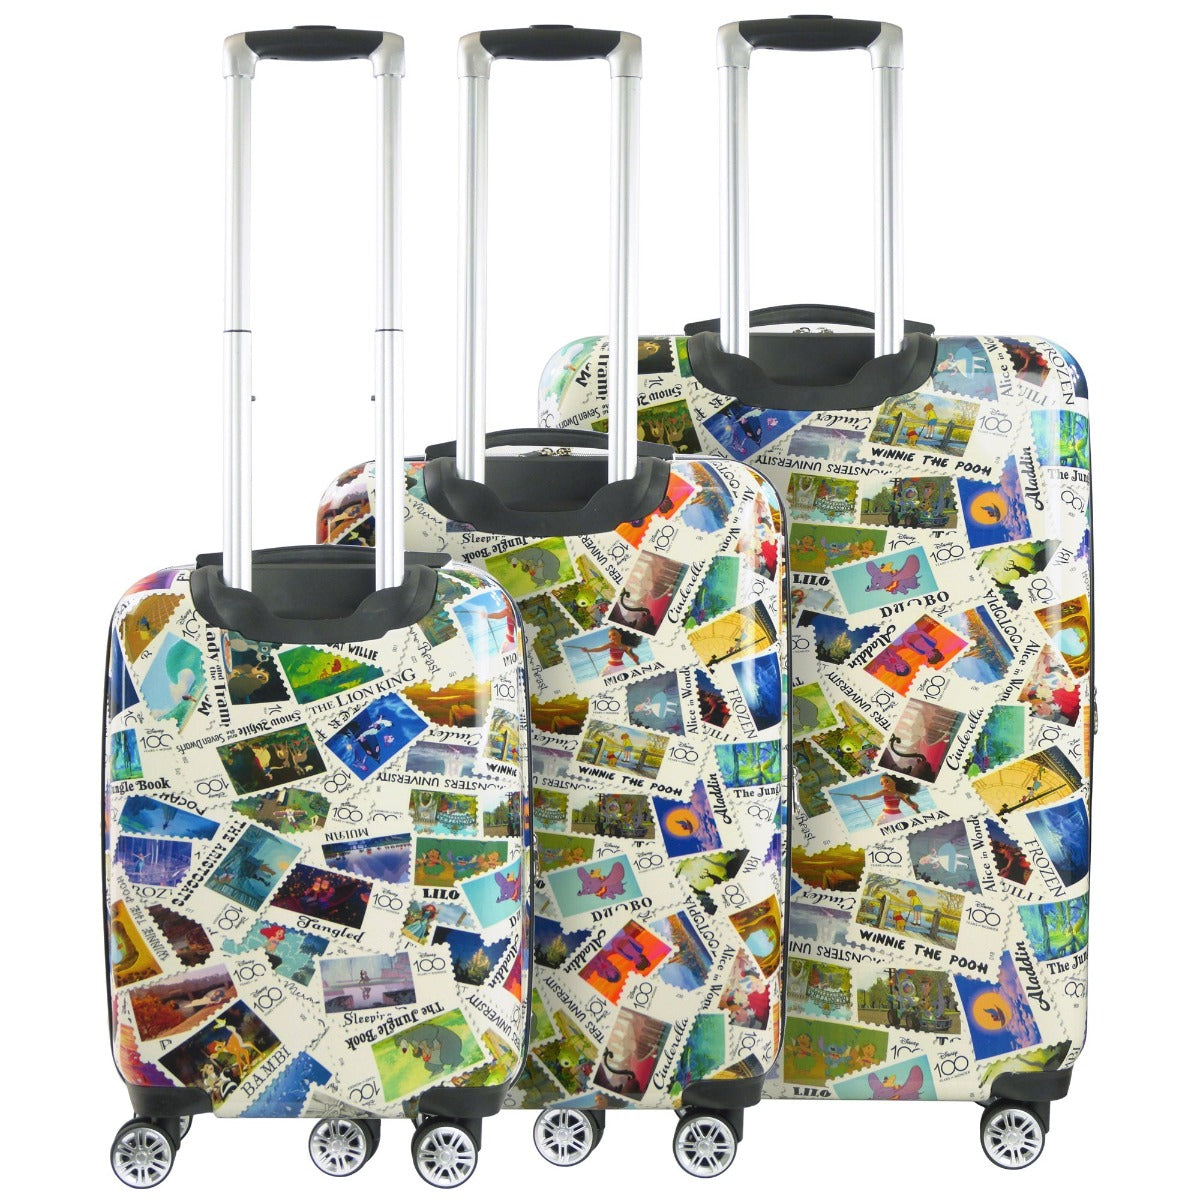 Ful Disney 100 Years Anniversary Stamps hardshell 3 piece rolling luggage set